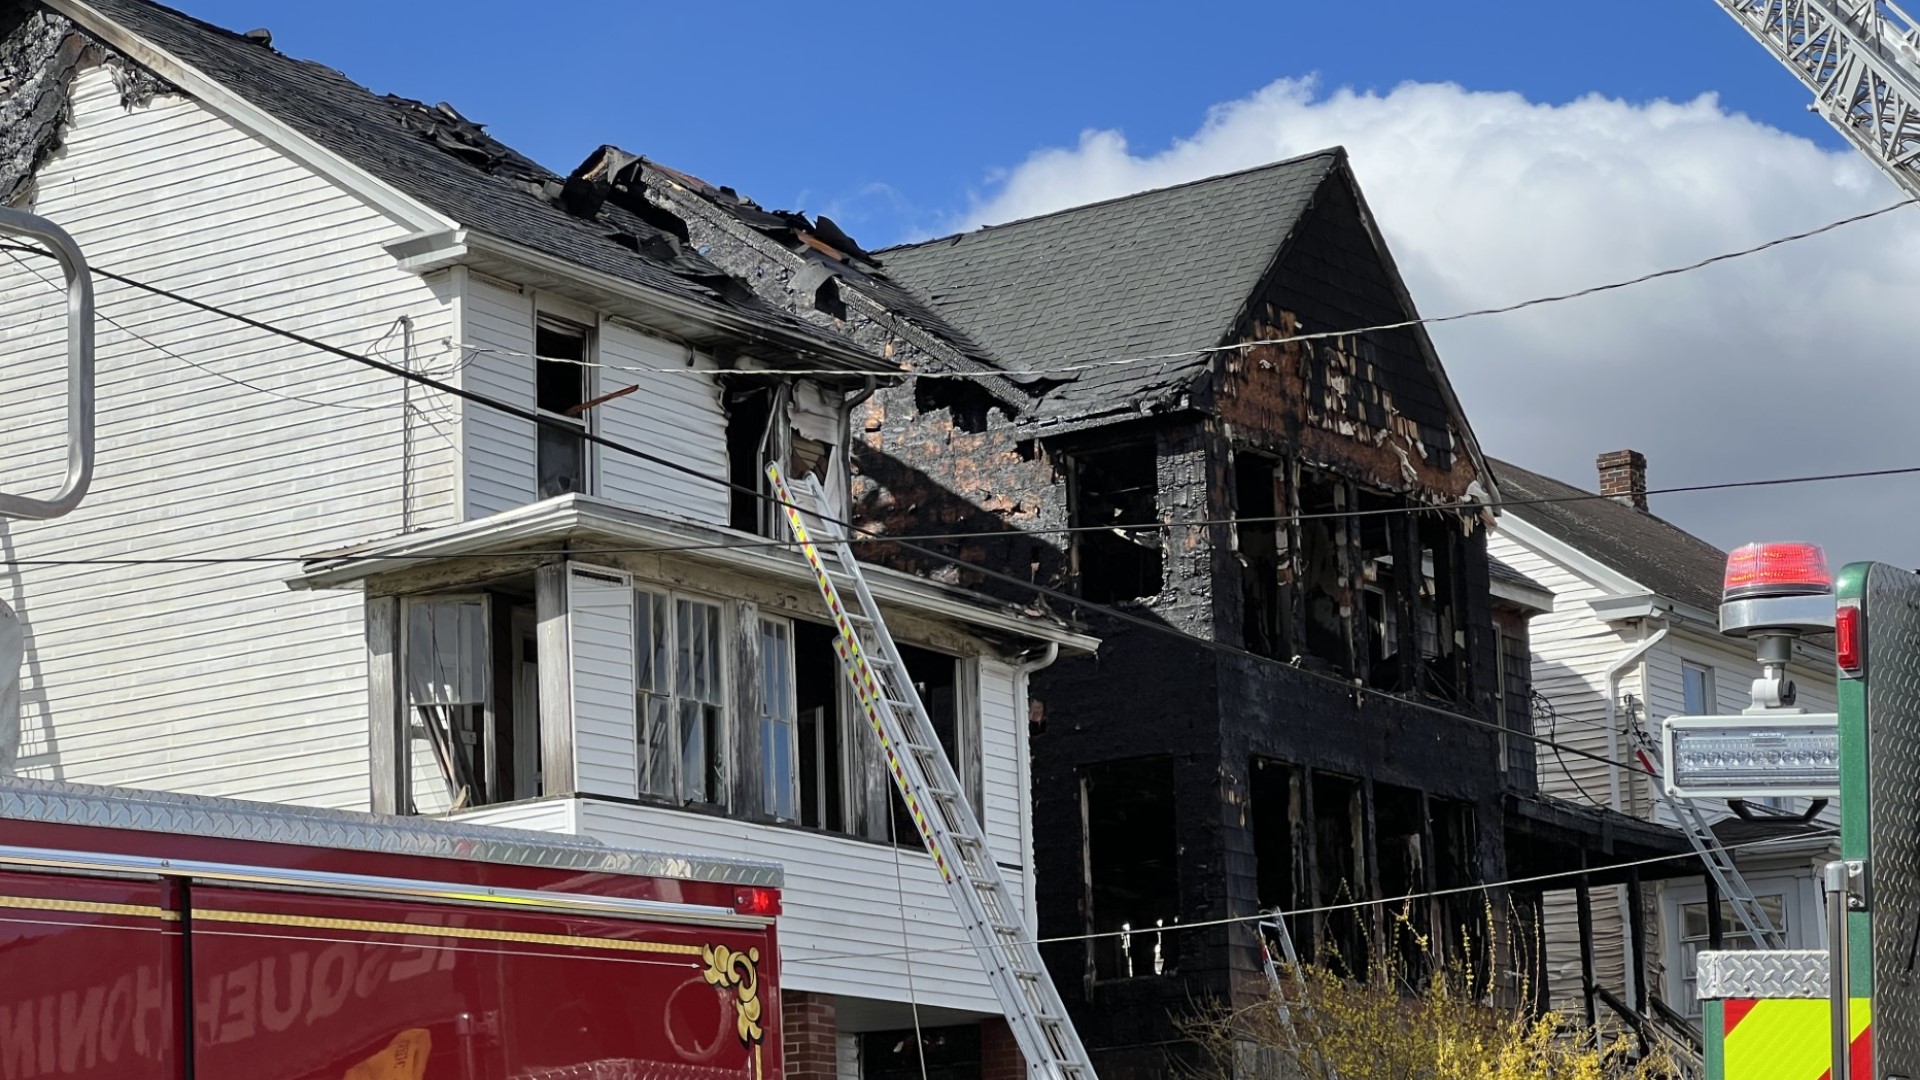 Crews were called to a house fire along the 200 block of E. Railroad Street in Nesquehoning just after 7 a.m. Sunday. It quickly spread to two neighboring homes.